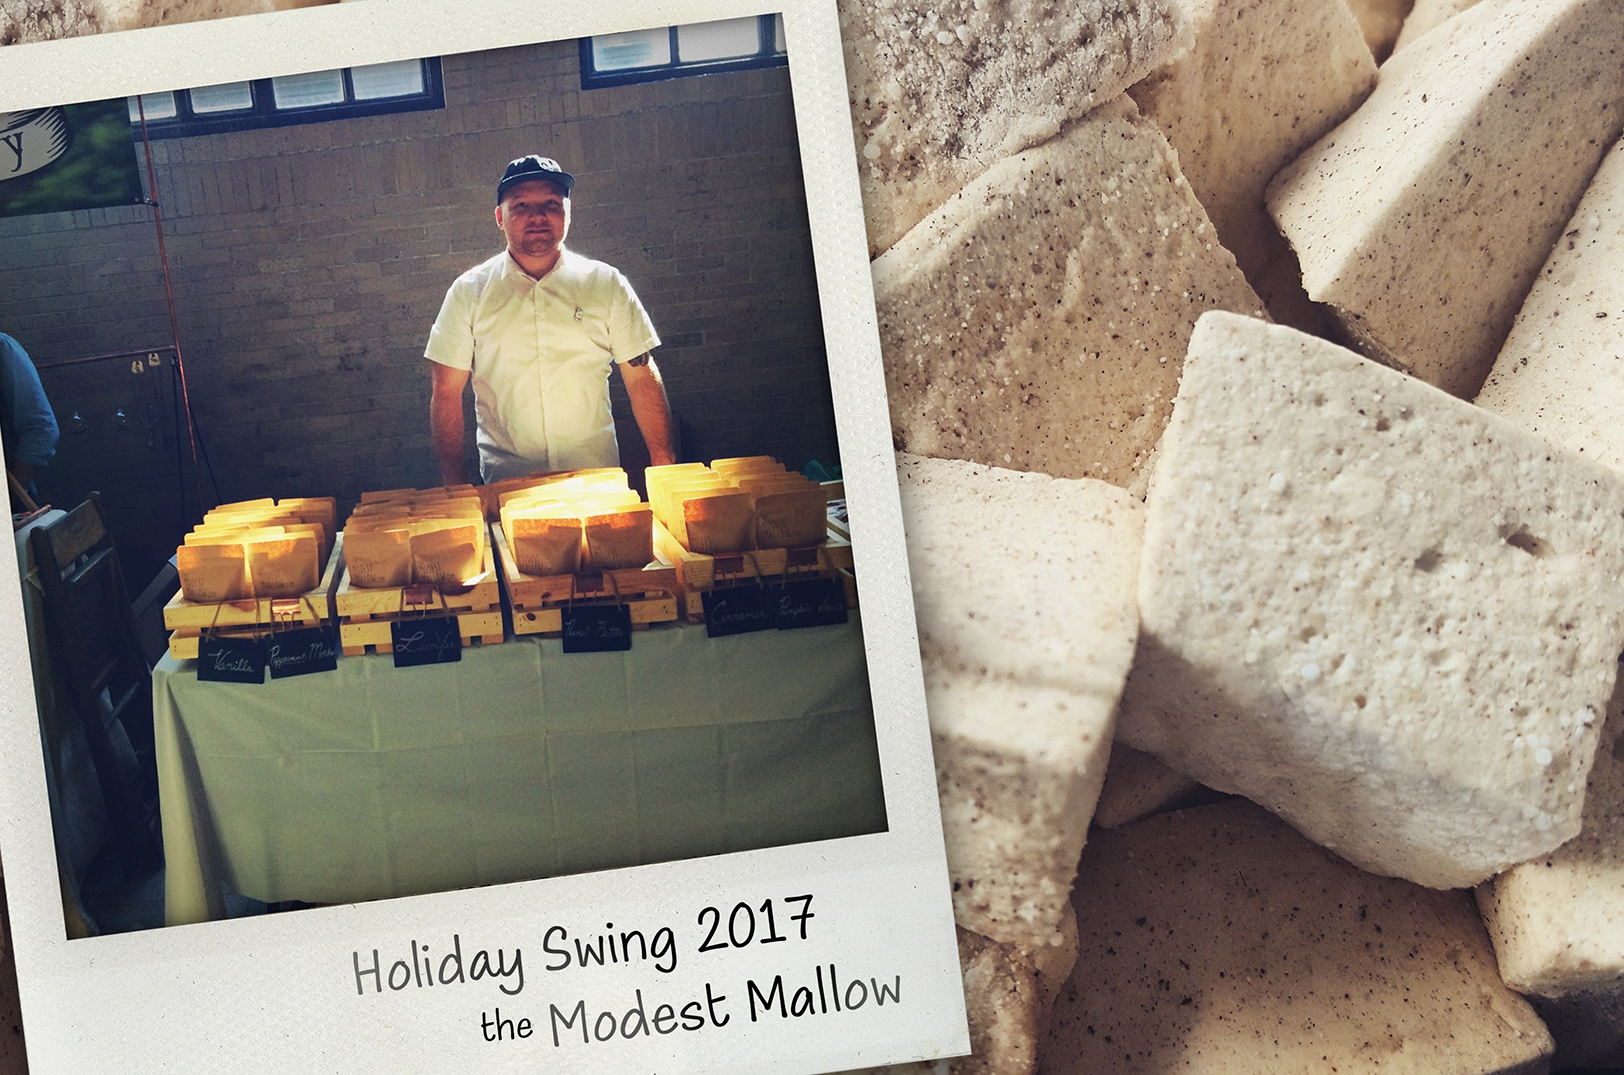 Modest to momentum: KC’s mellow marshmallow maker is hopeful for a 2021 comeback